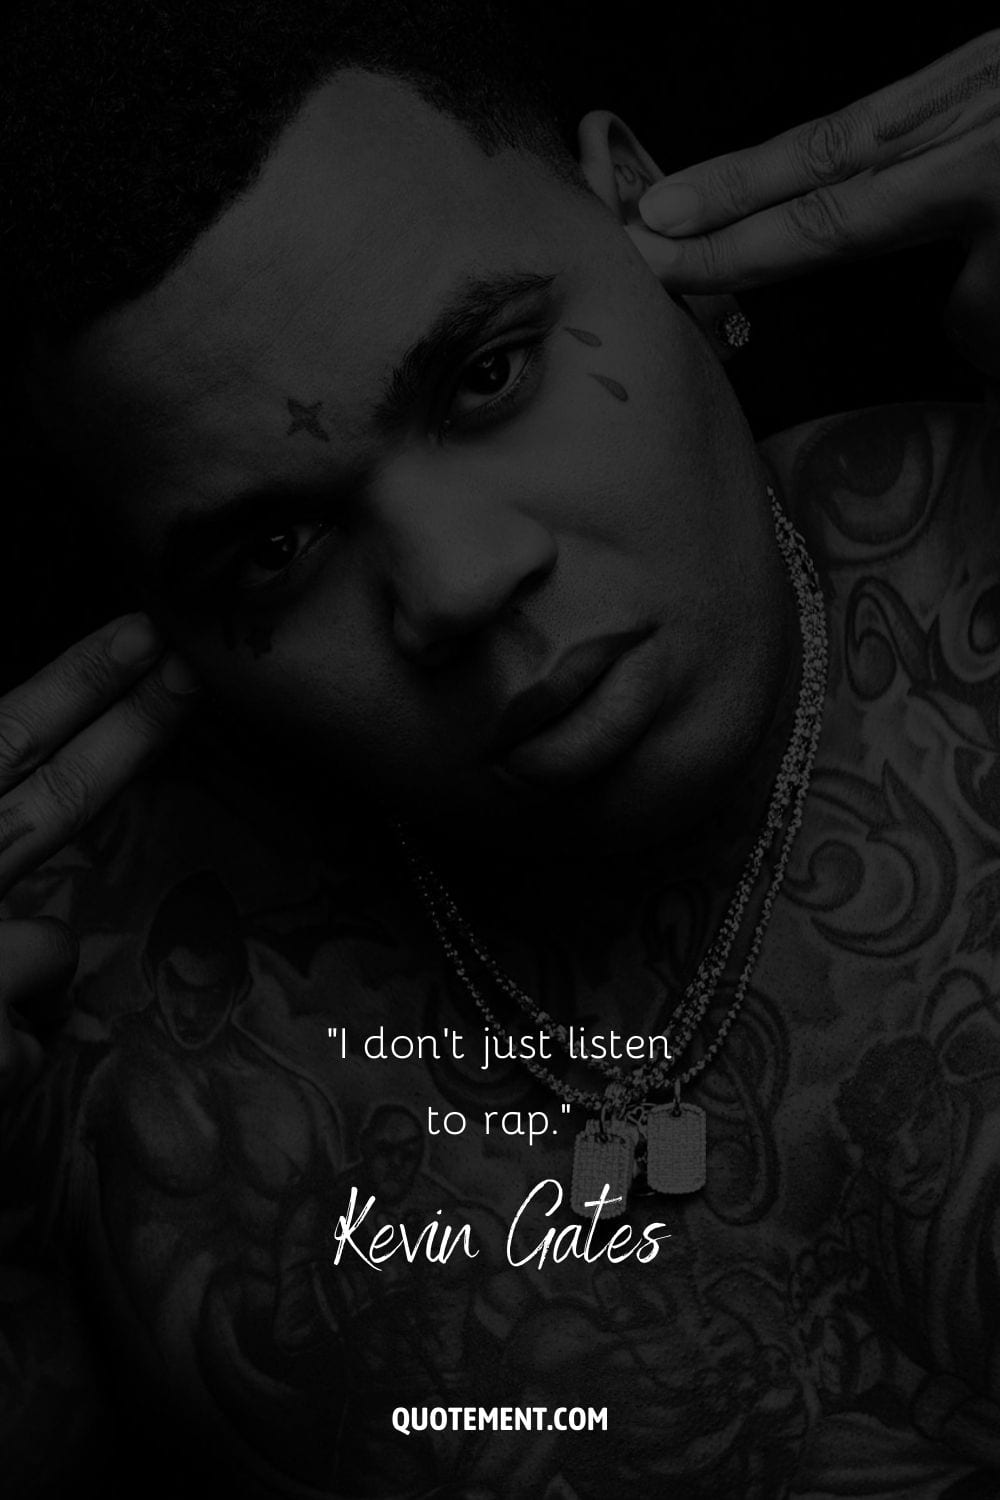 “I don’t just listen to rap.” – Kevin Gates